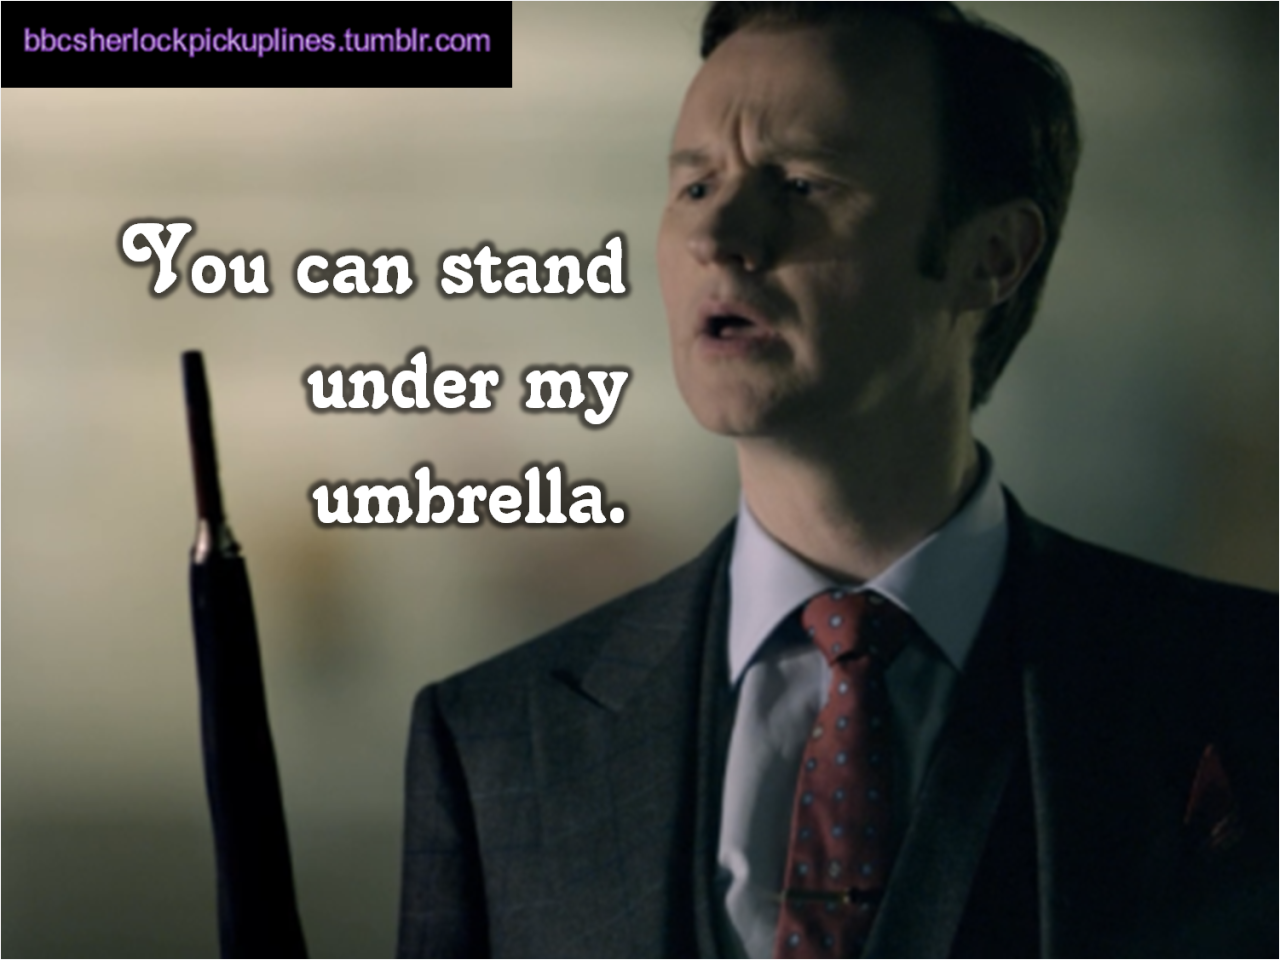 The best of Mycroft&rsquo;s umbrella, from BBC Sherlock pick-up lines. Mycroft&rsquo;s